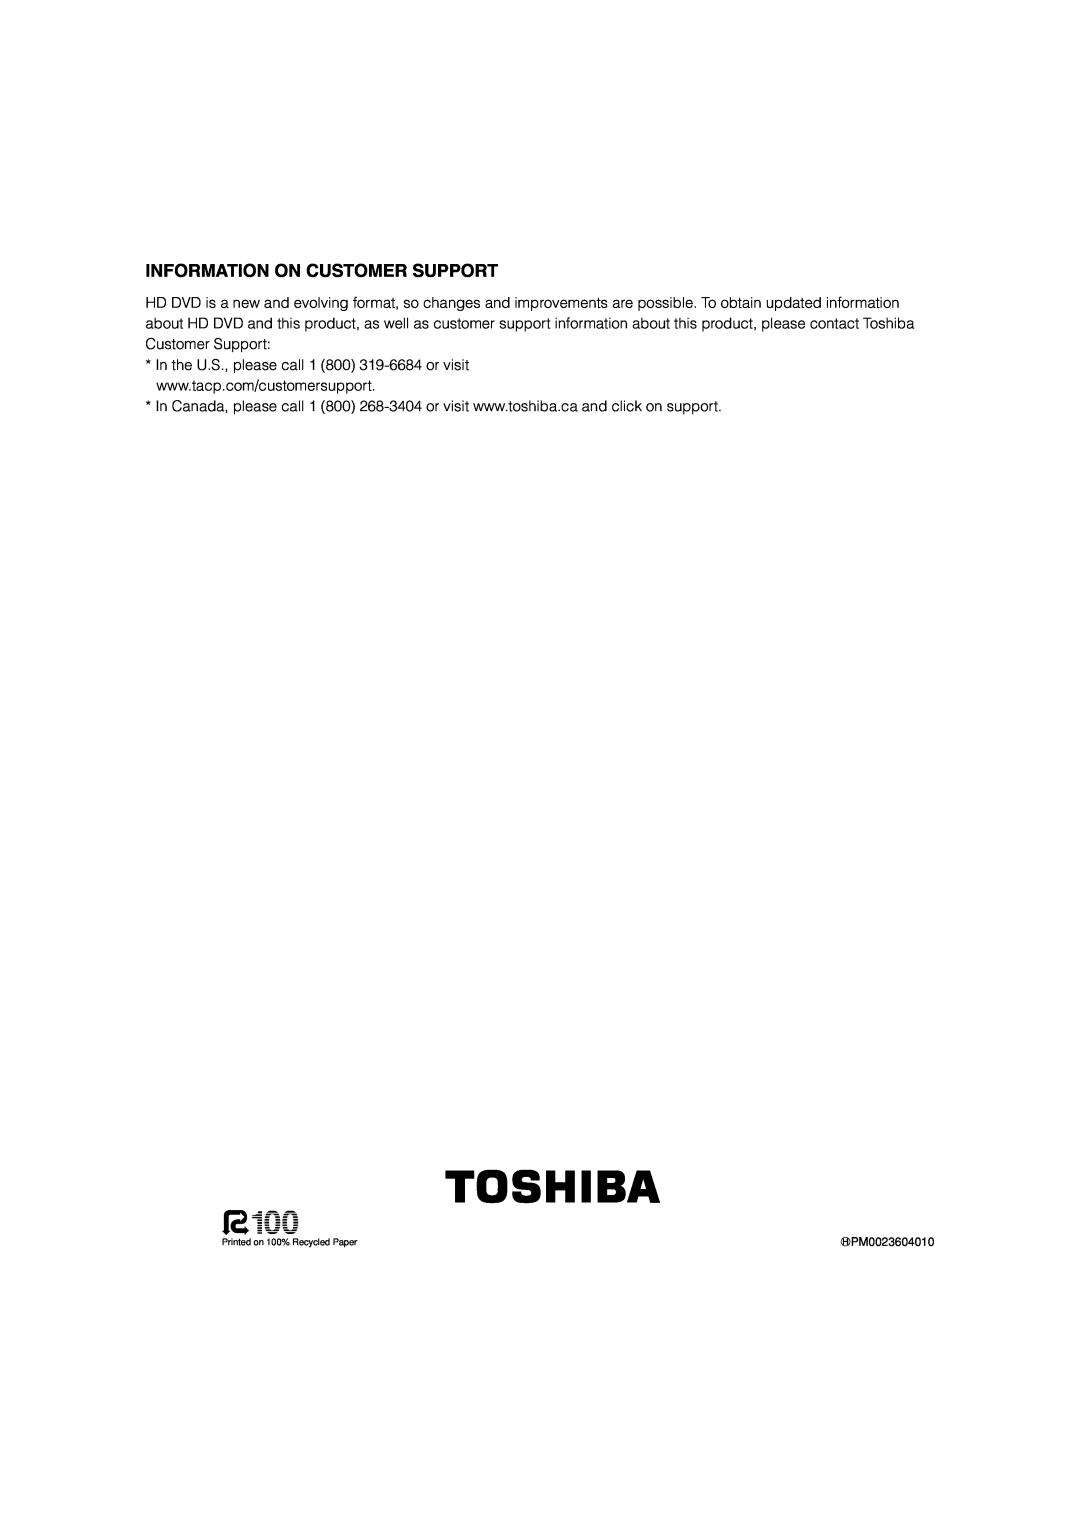 Toshiba HD-XA1, hd-xa1kn owner manual Information On Customer Support, PM0023604010, Printed on 100% Recycled Paper 